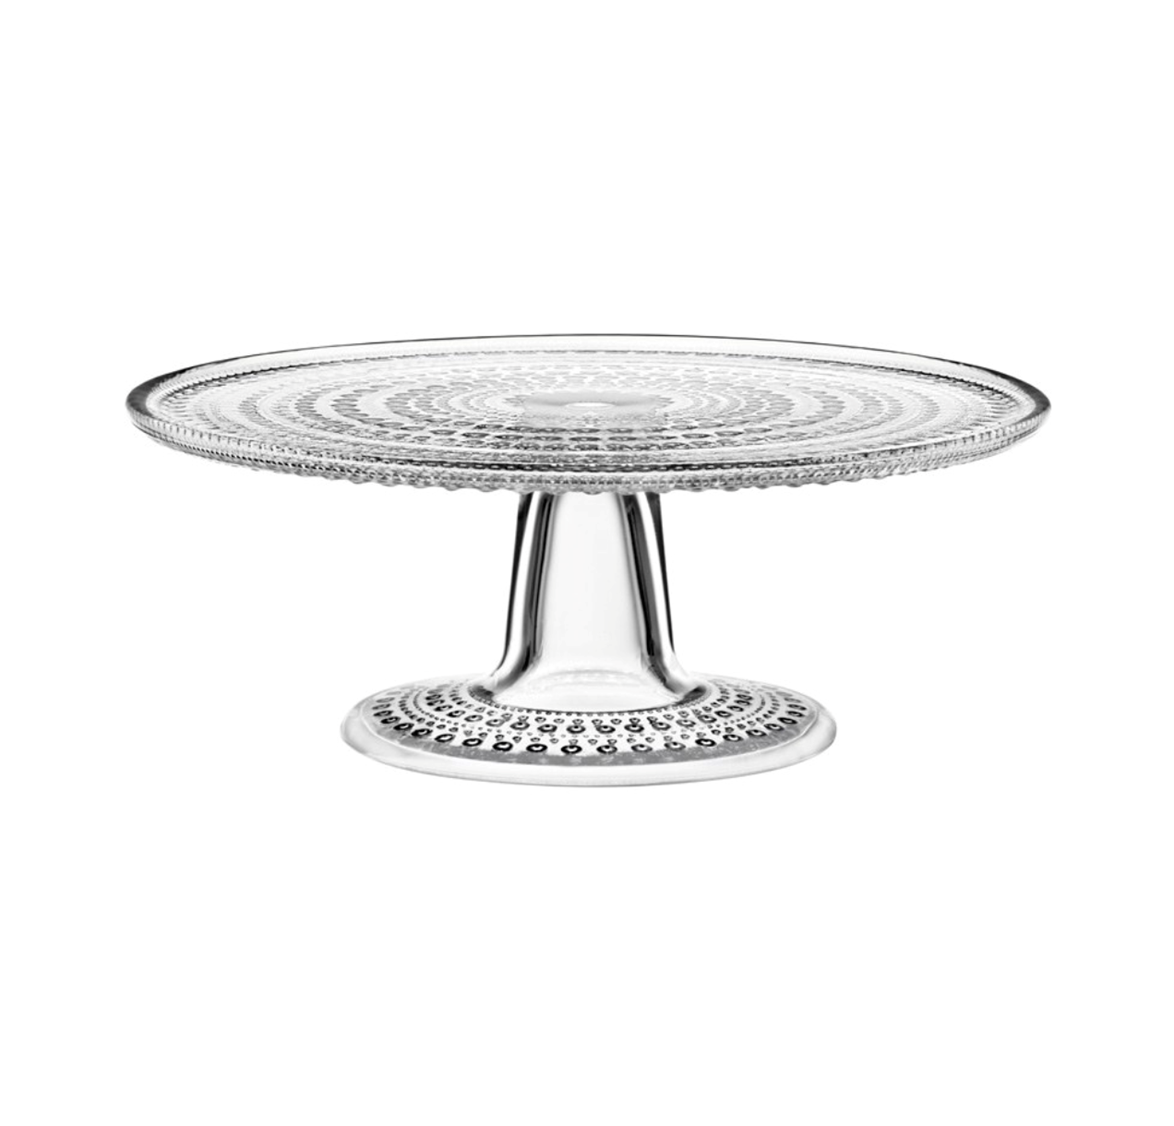 **['Kastehelmi' cake stand in Clear, $119/24cm, Iittala](https://www.iittala.com.au/kastehelmi-cake-stand-24cm-clear.html|target="_blank"|rel="nofollow")**

For pure elegance, you can't go past a glass cake stand to set the stage for your dessert to be the hero and this timeless style does just that. Named for the Finnish name for 'dewdrop,' circles of bubbles are pressed into the glass design. **[SHOP NOW](https://www.iittala.com.au/kastehelmi-cake-stand-24cm-clear.html|target="_blank"|rel="nofollow")**